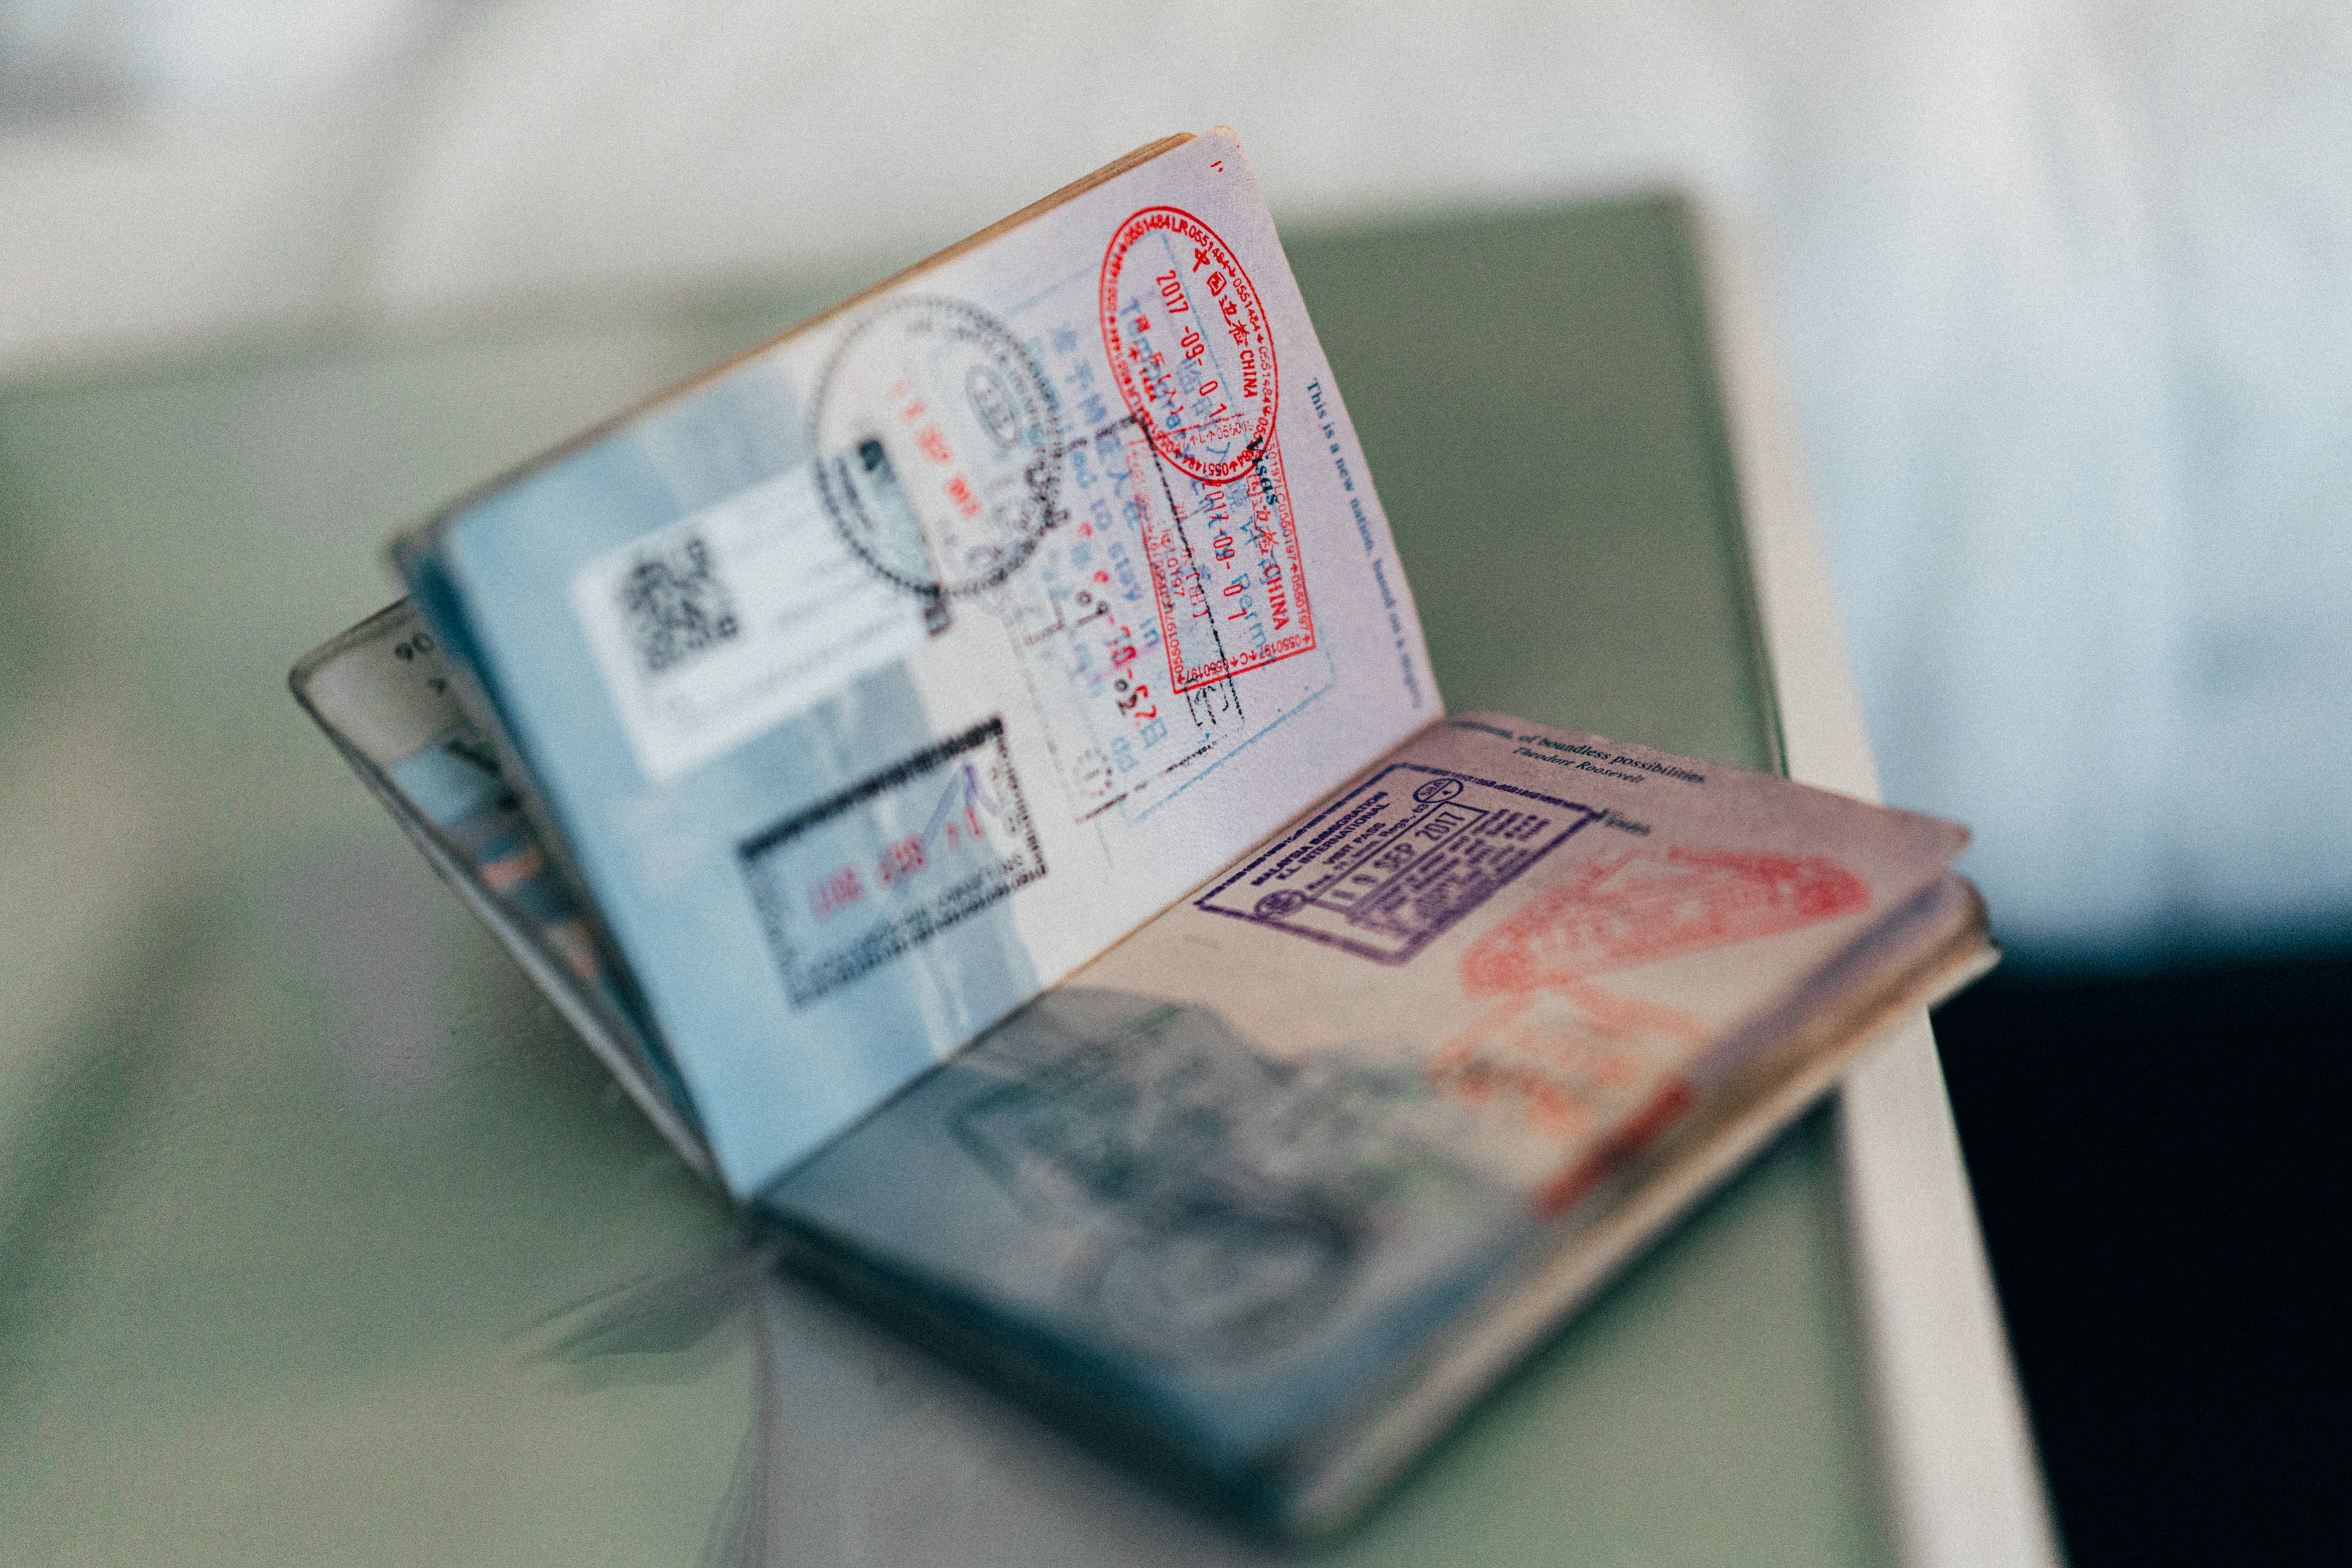 a passport with various travel stamps